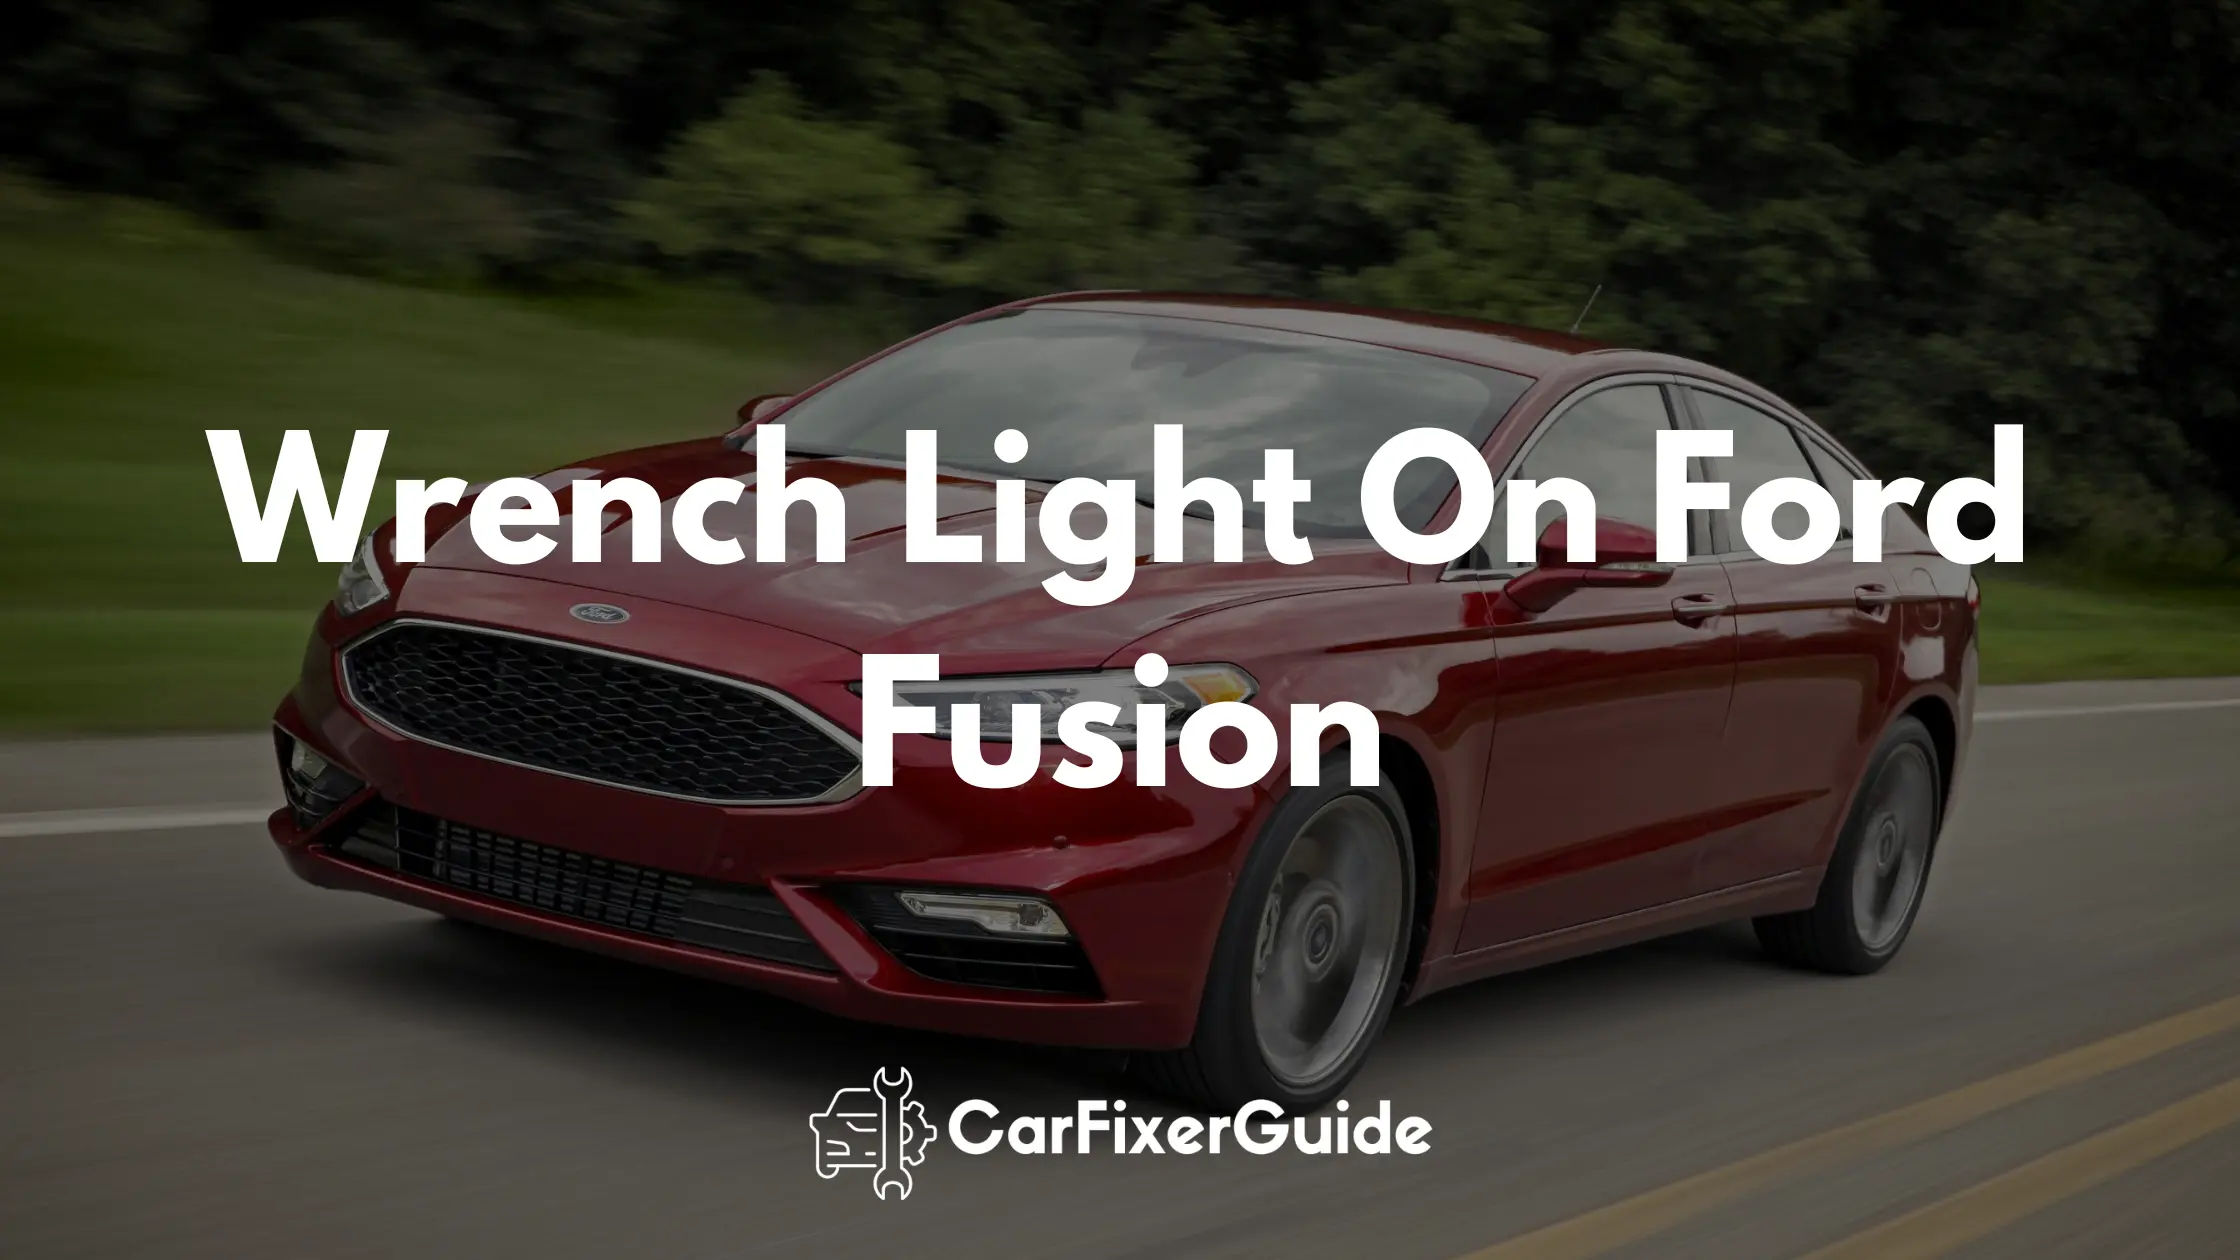 Wrench Light On Ford Fusion